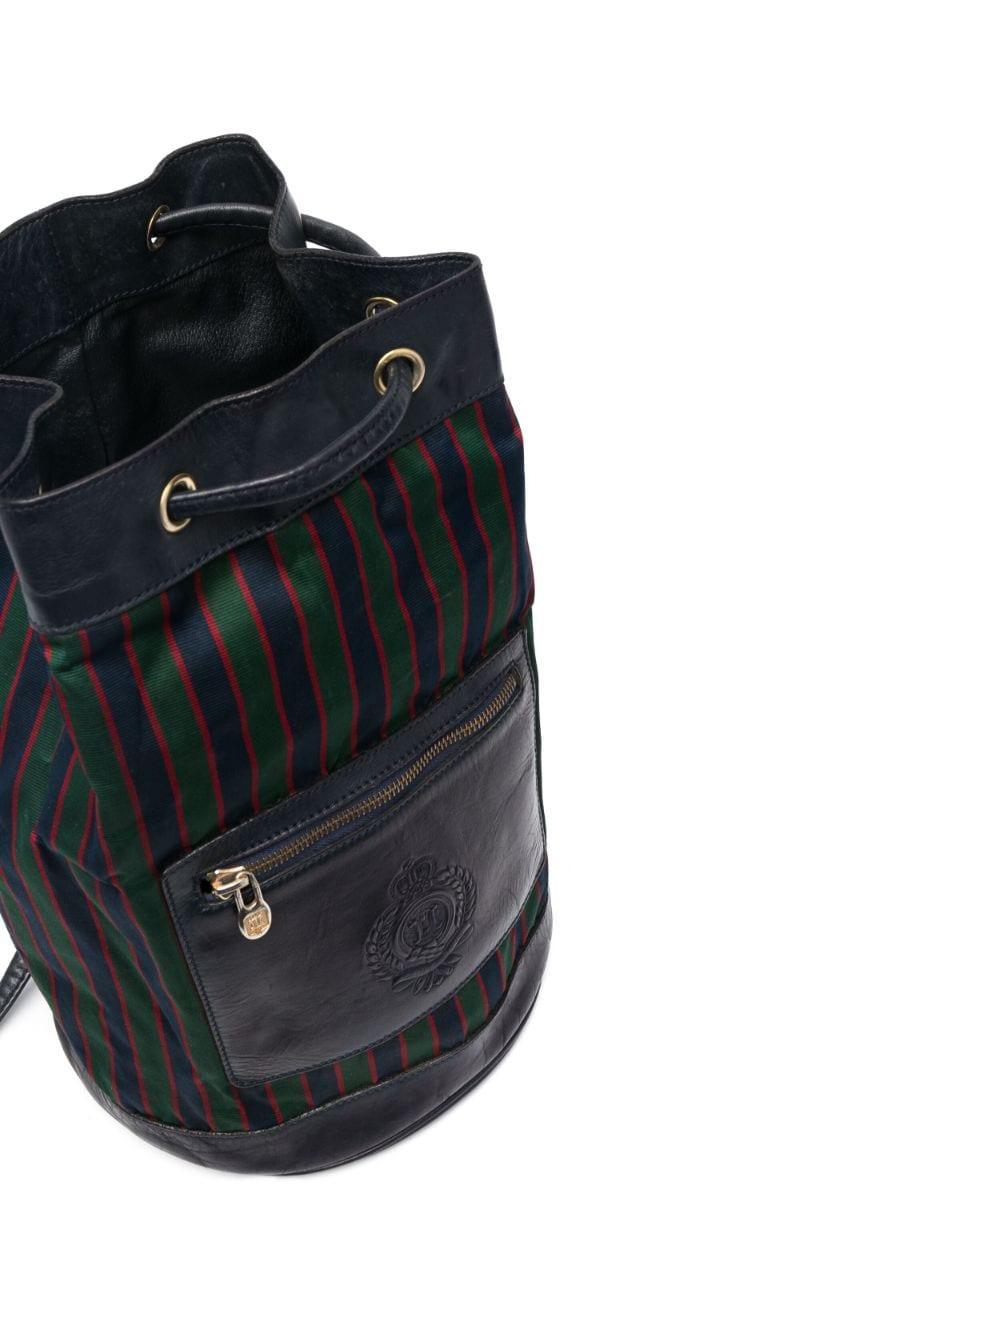 Celine Large Striped and  Calf Leather Bucket Bag In Good Condition For Sale In Paris, FR